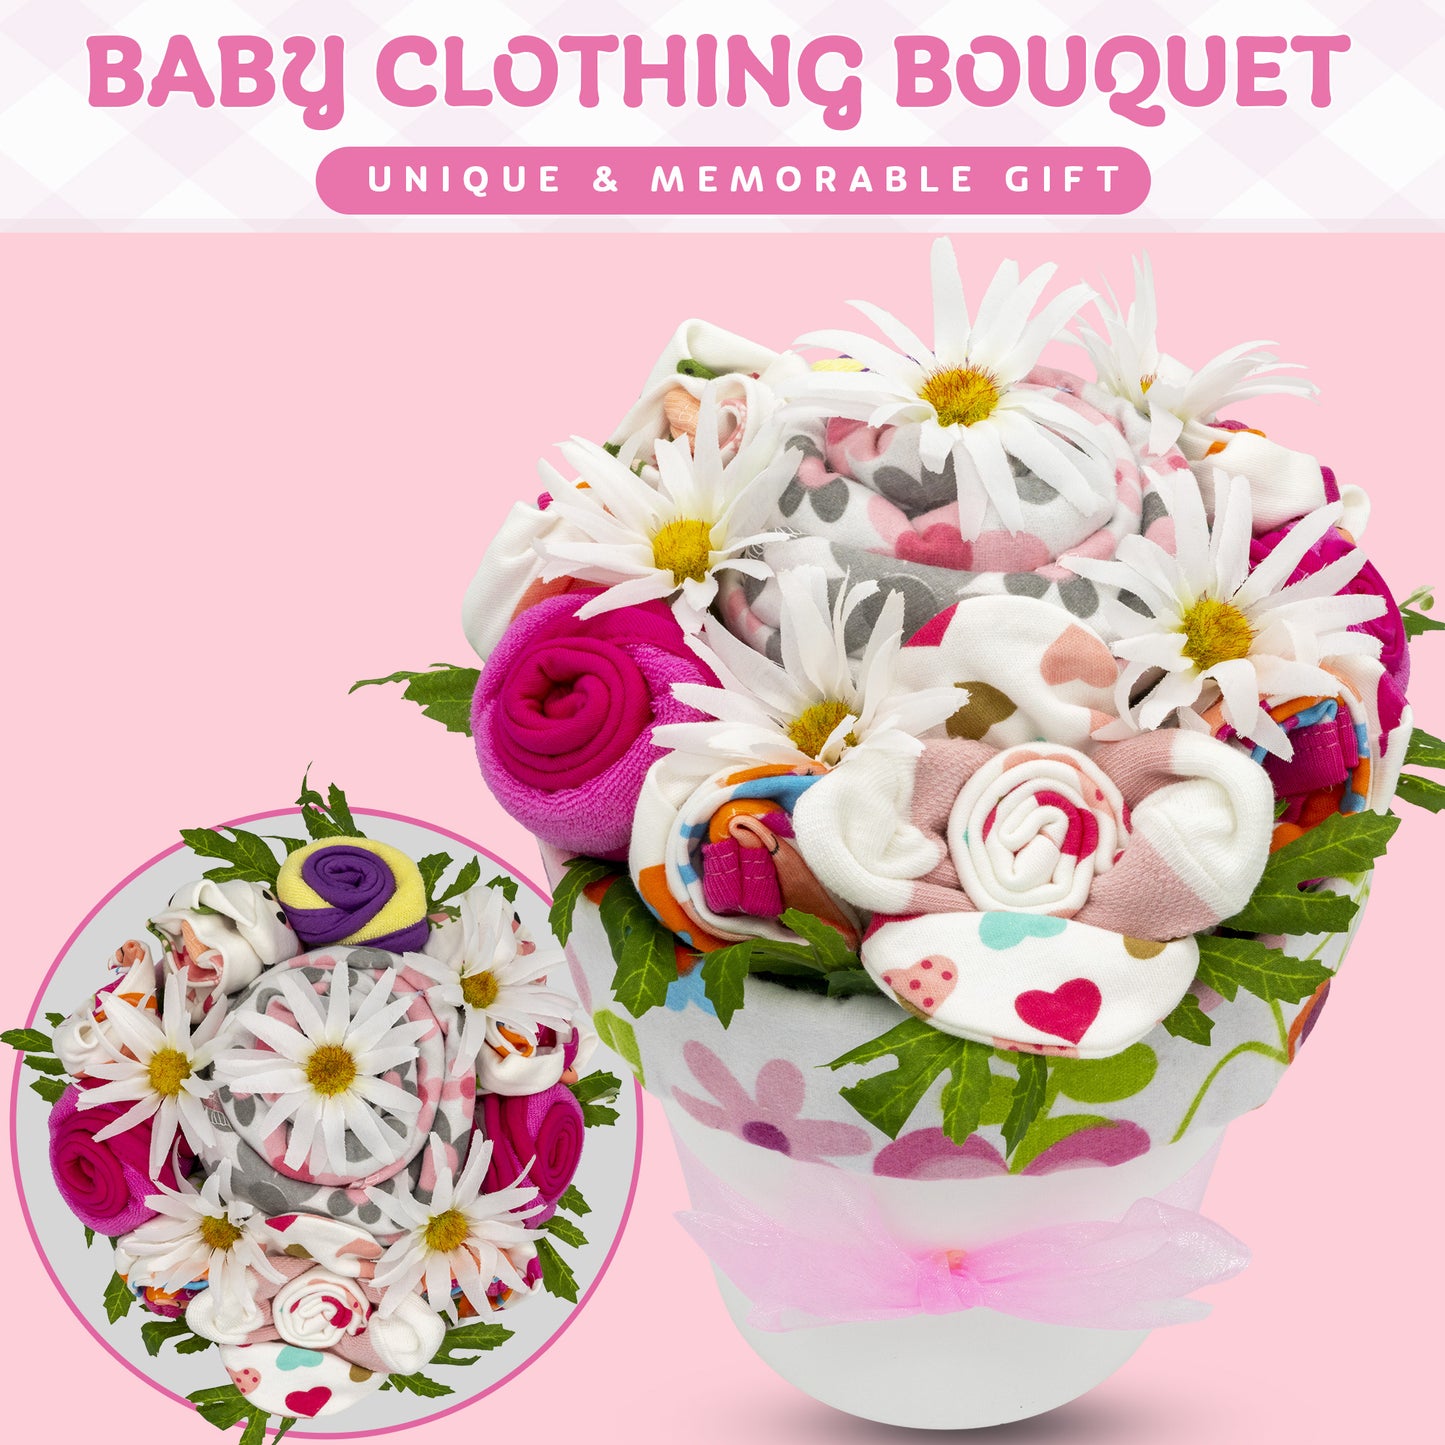 Baby Clothing Flower Bouquet, New Baby Girl Gift Basket with Baby Clothing Arranged Like Celebration Flowers, Creative Unique Baby Gift For New Parents